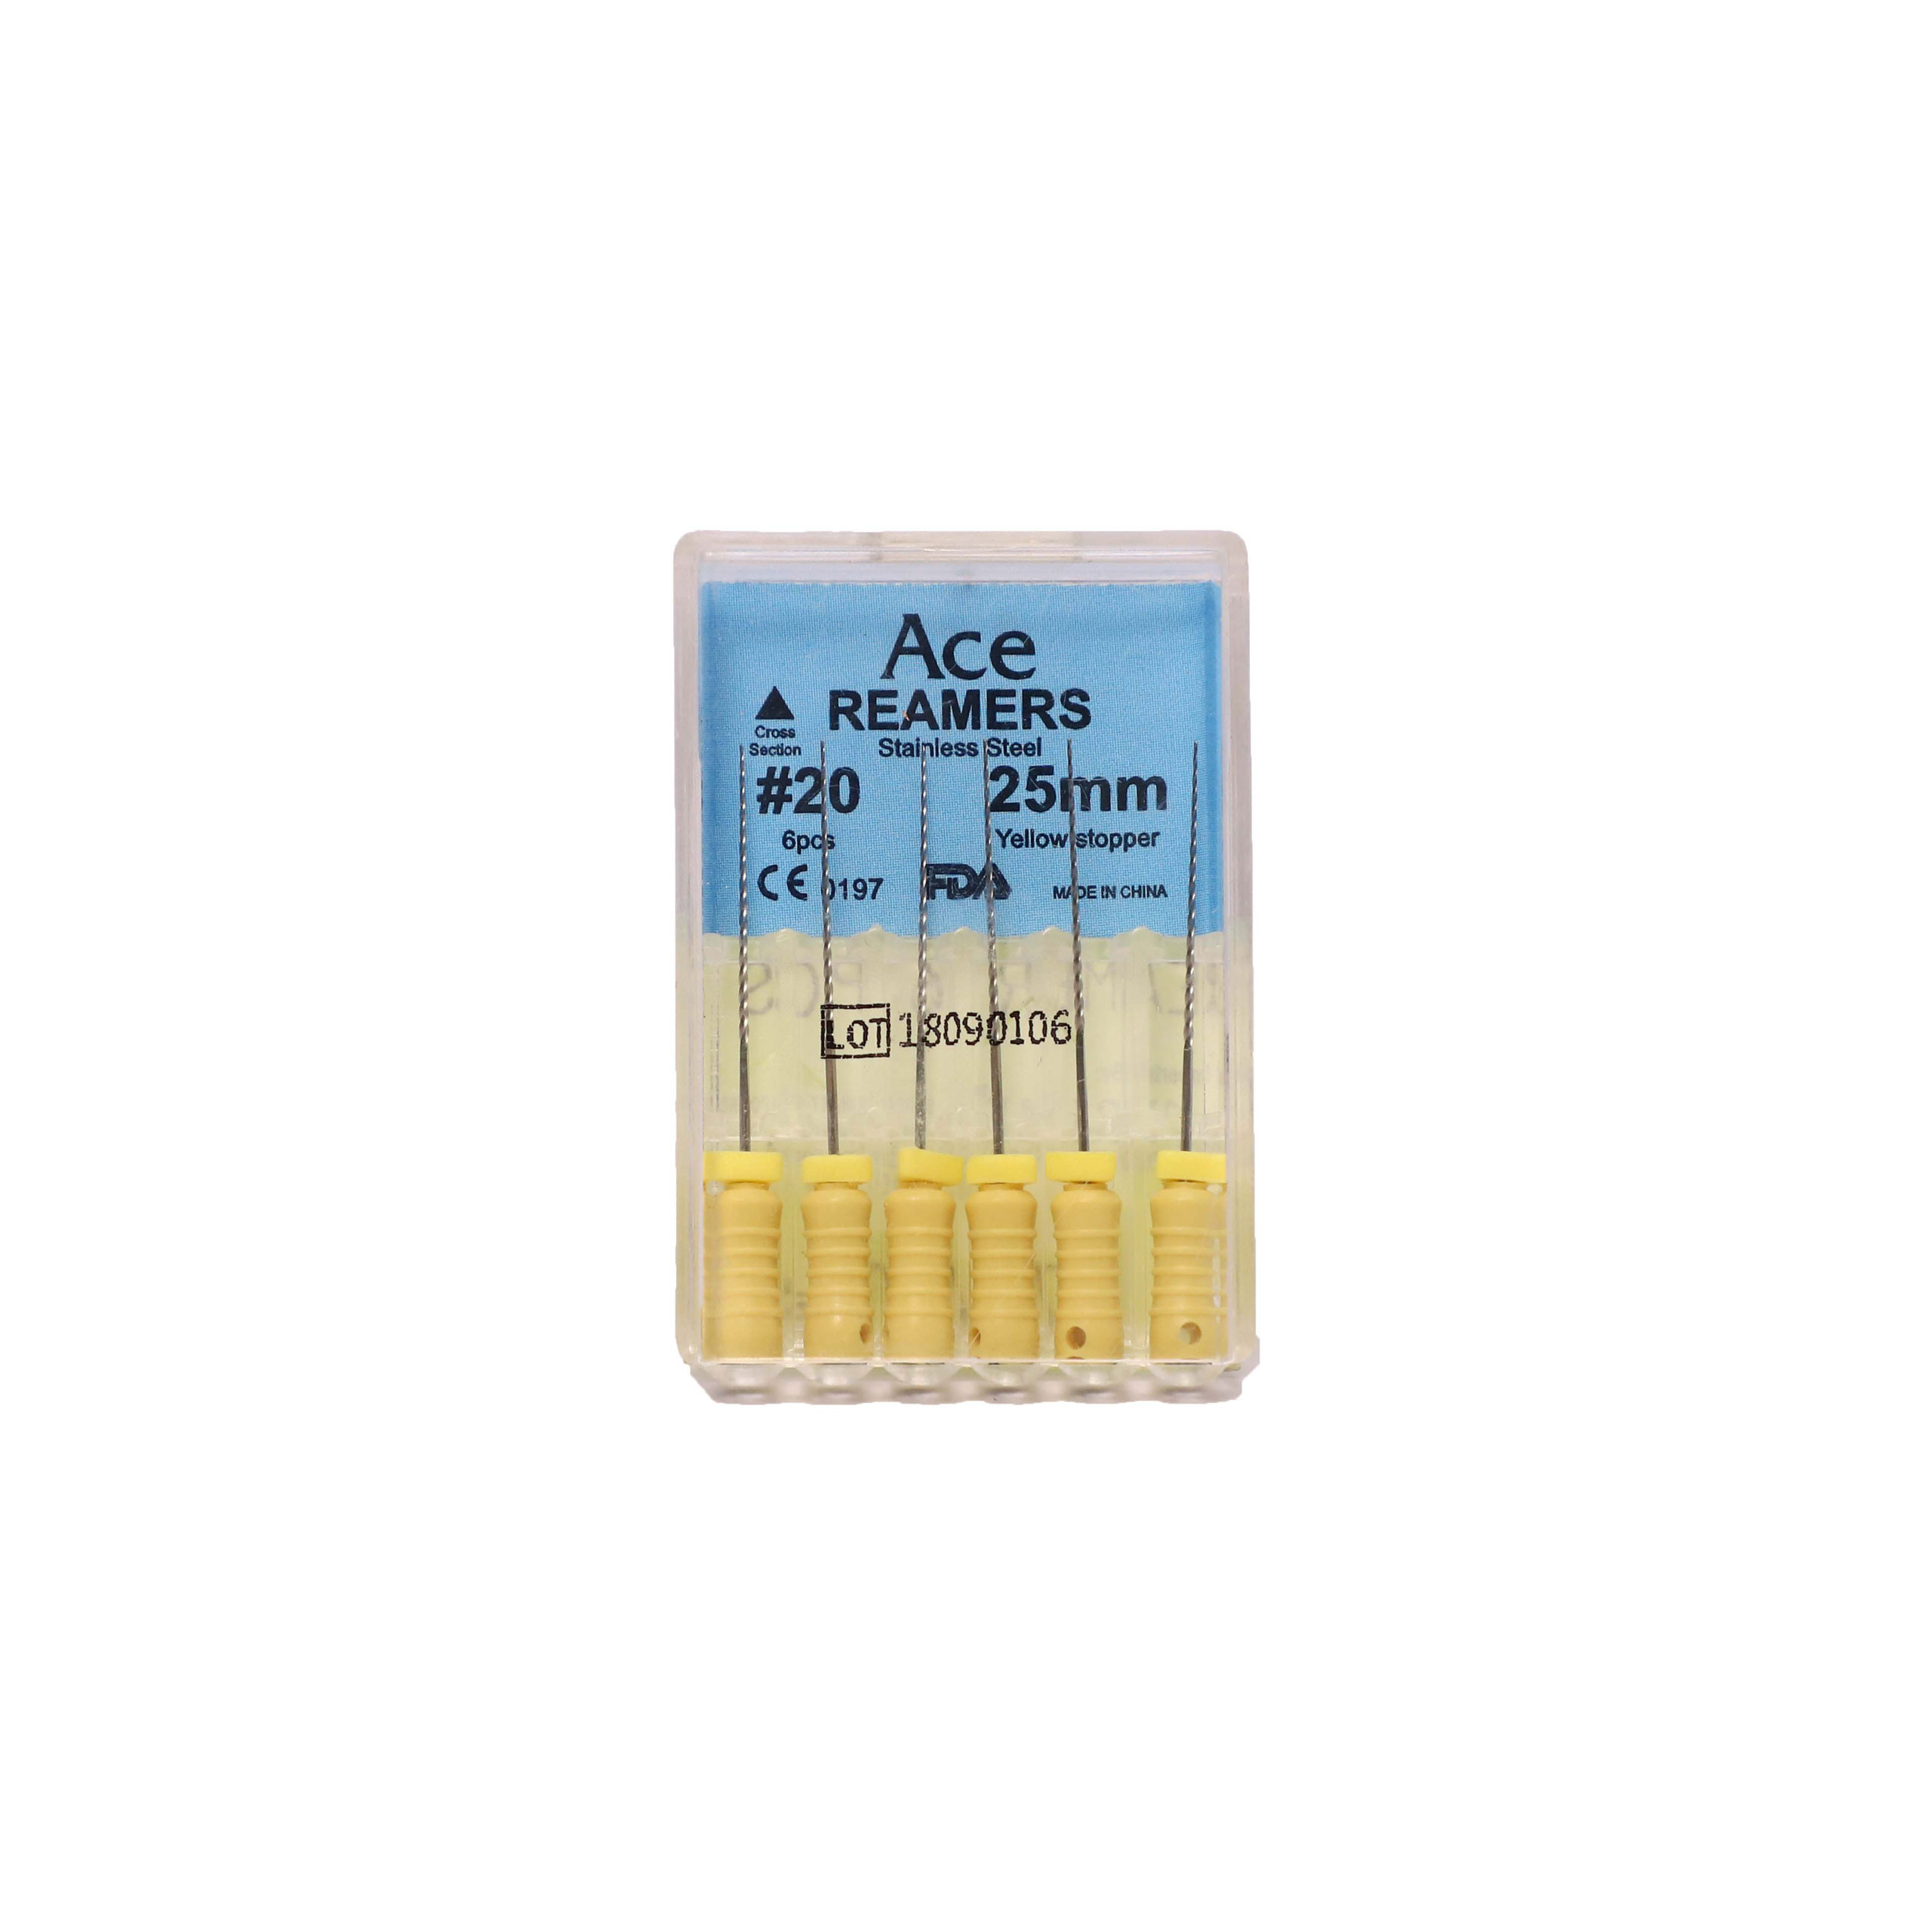 ACE Reamers #20 25mm  (Pack of 5)